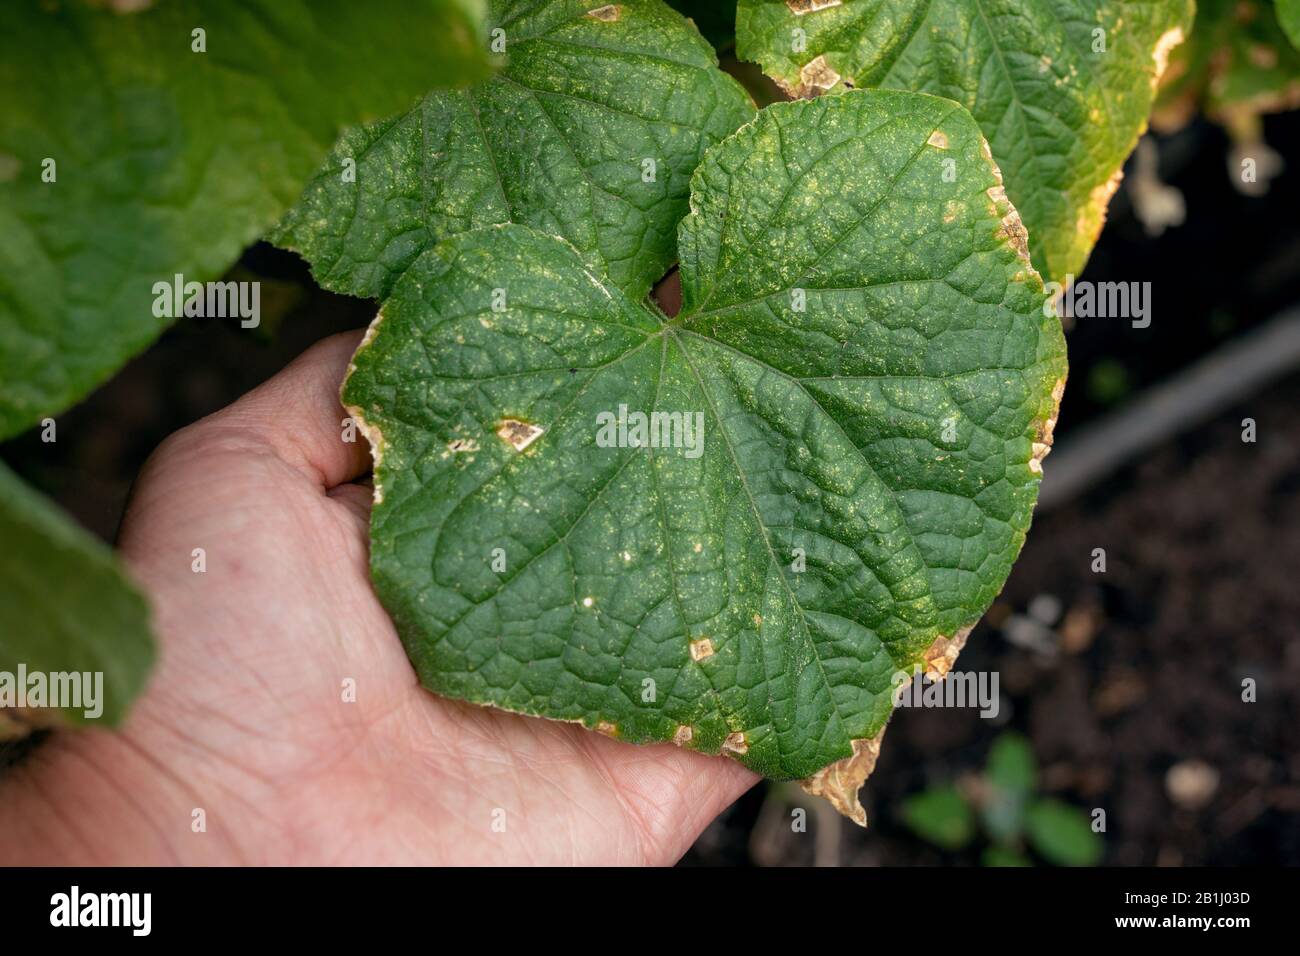 Target leaf spot disease on cucumber. cucumber plant affected by diseases in garden or greenhouse. Stock Photo